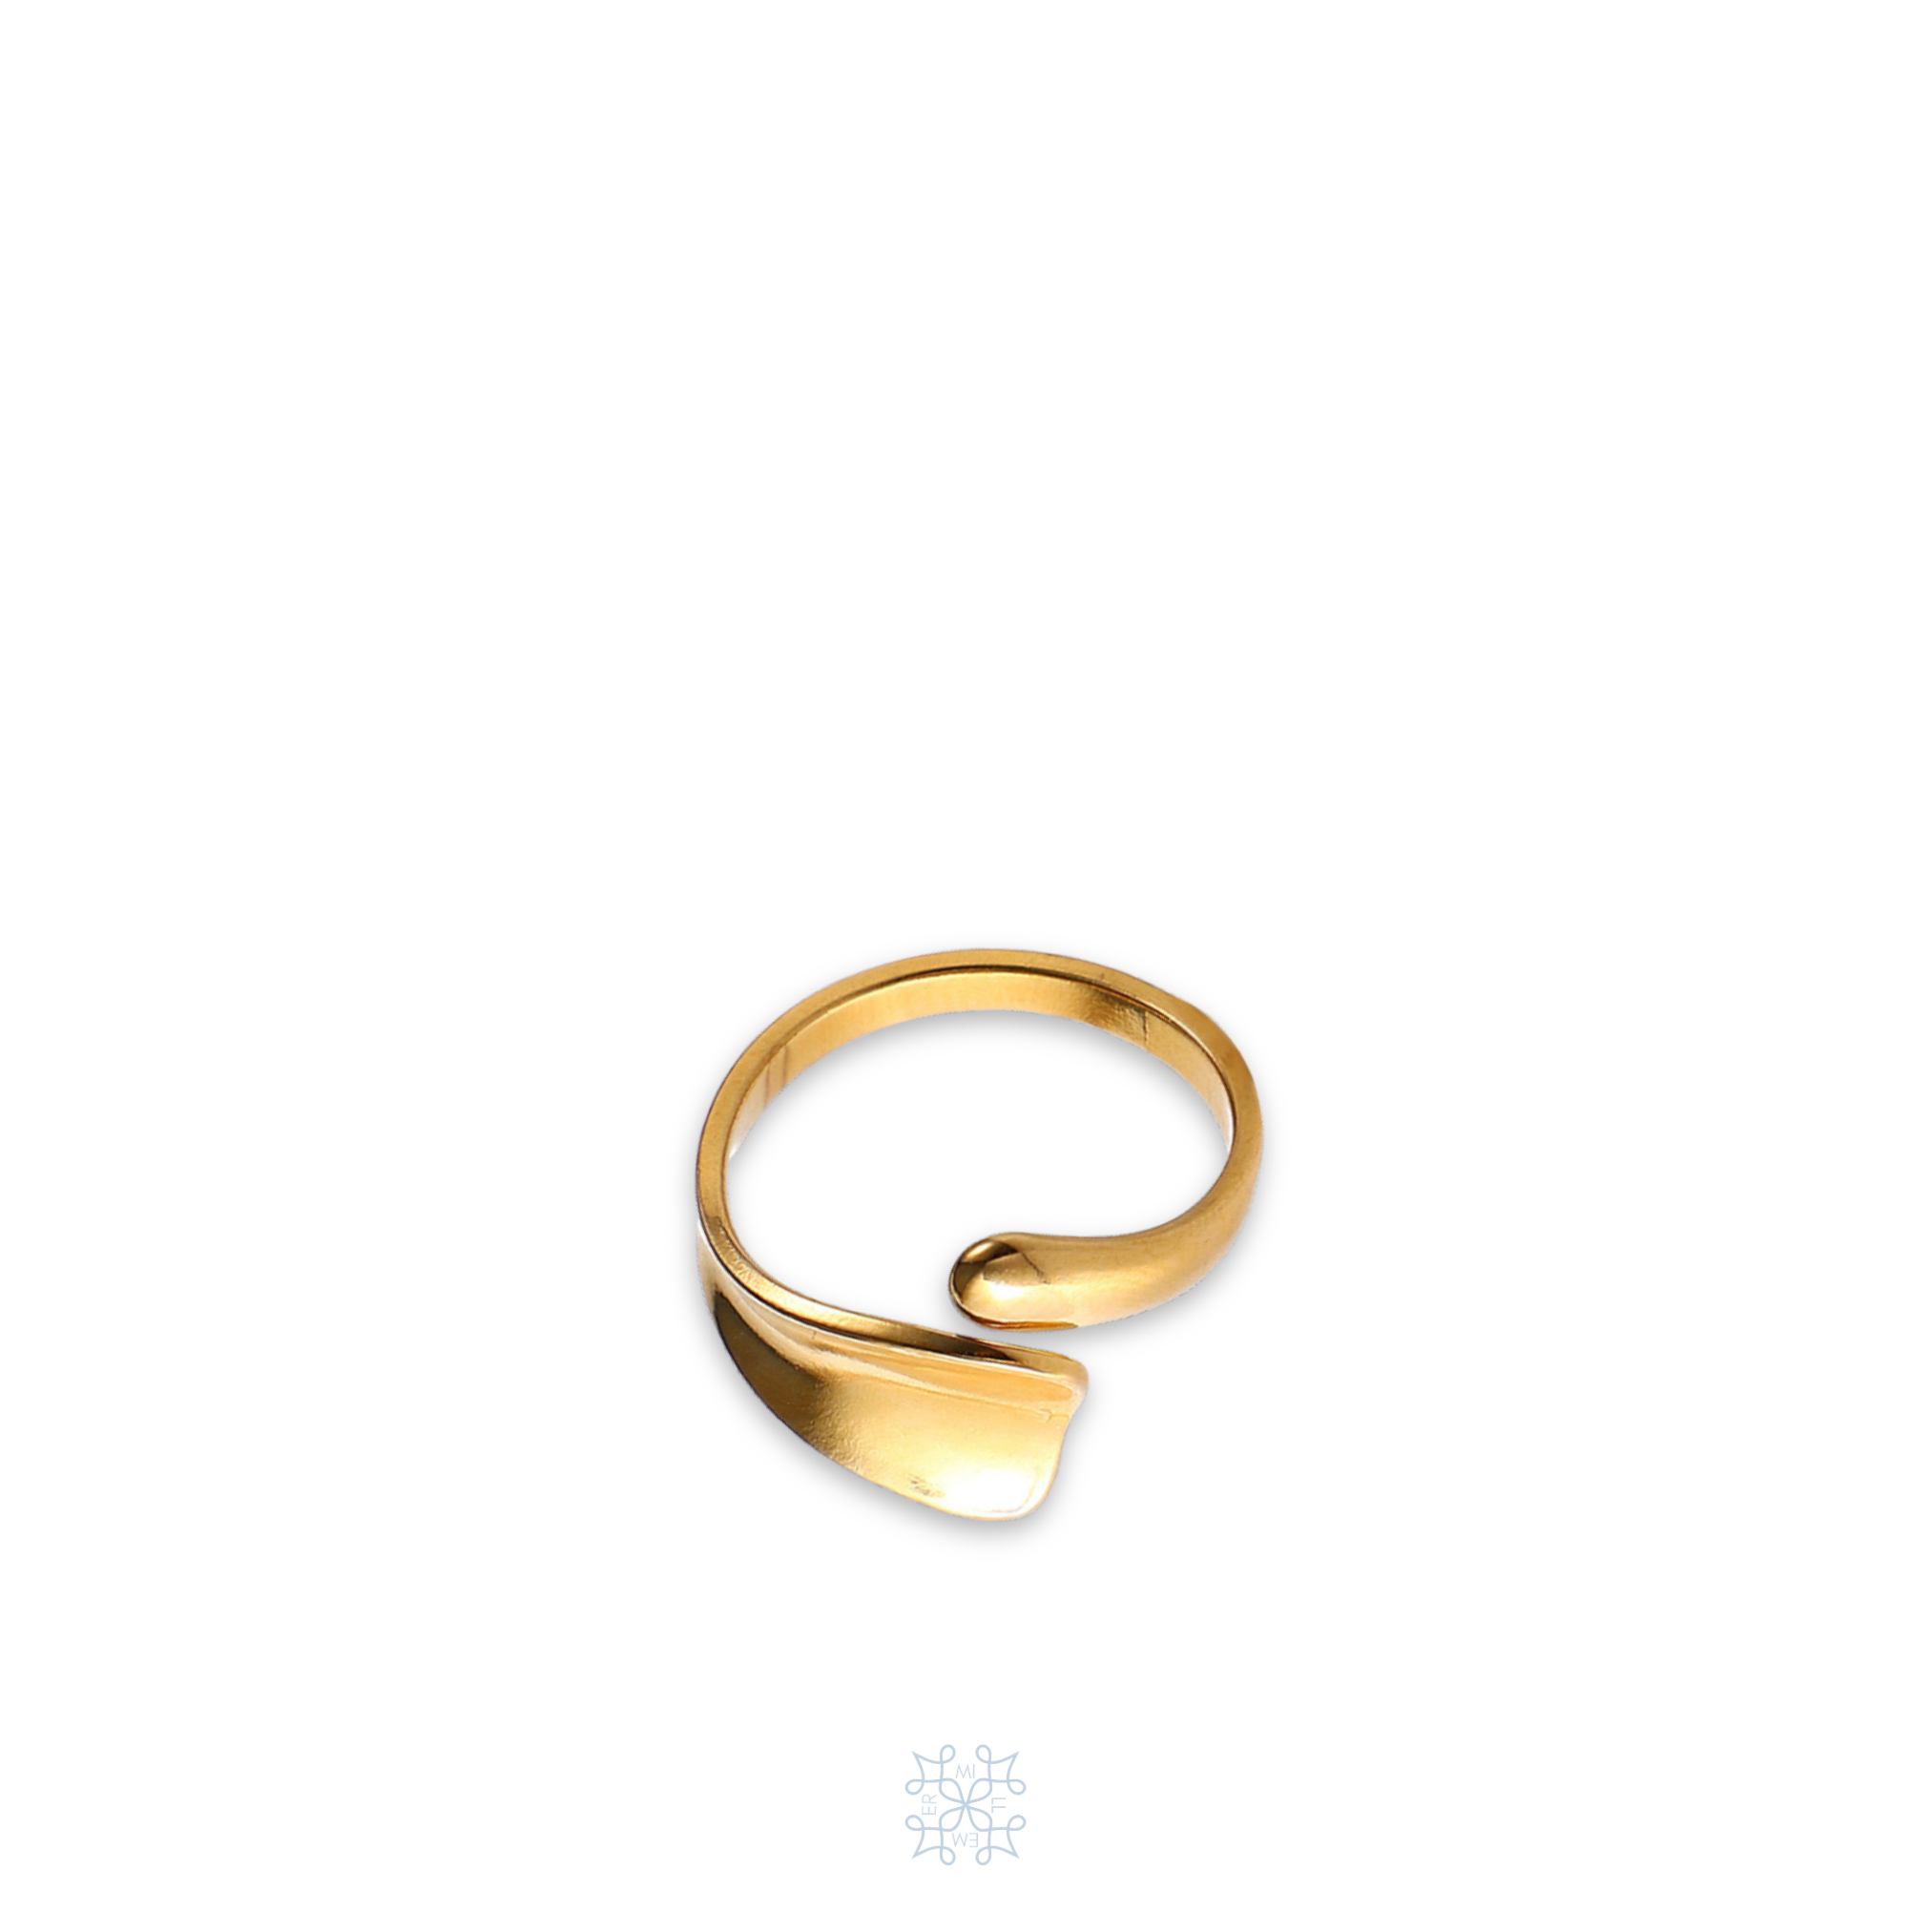 Adjustable gold ring. The irregular shape of a tail. 